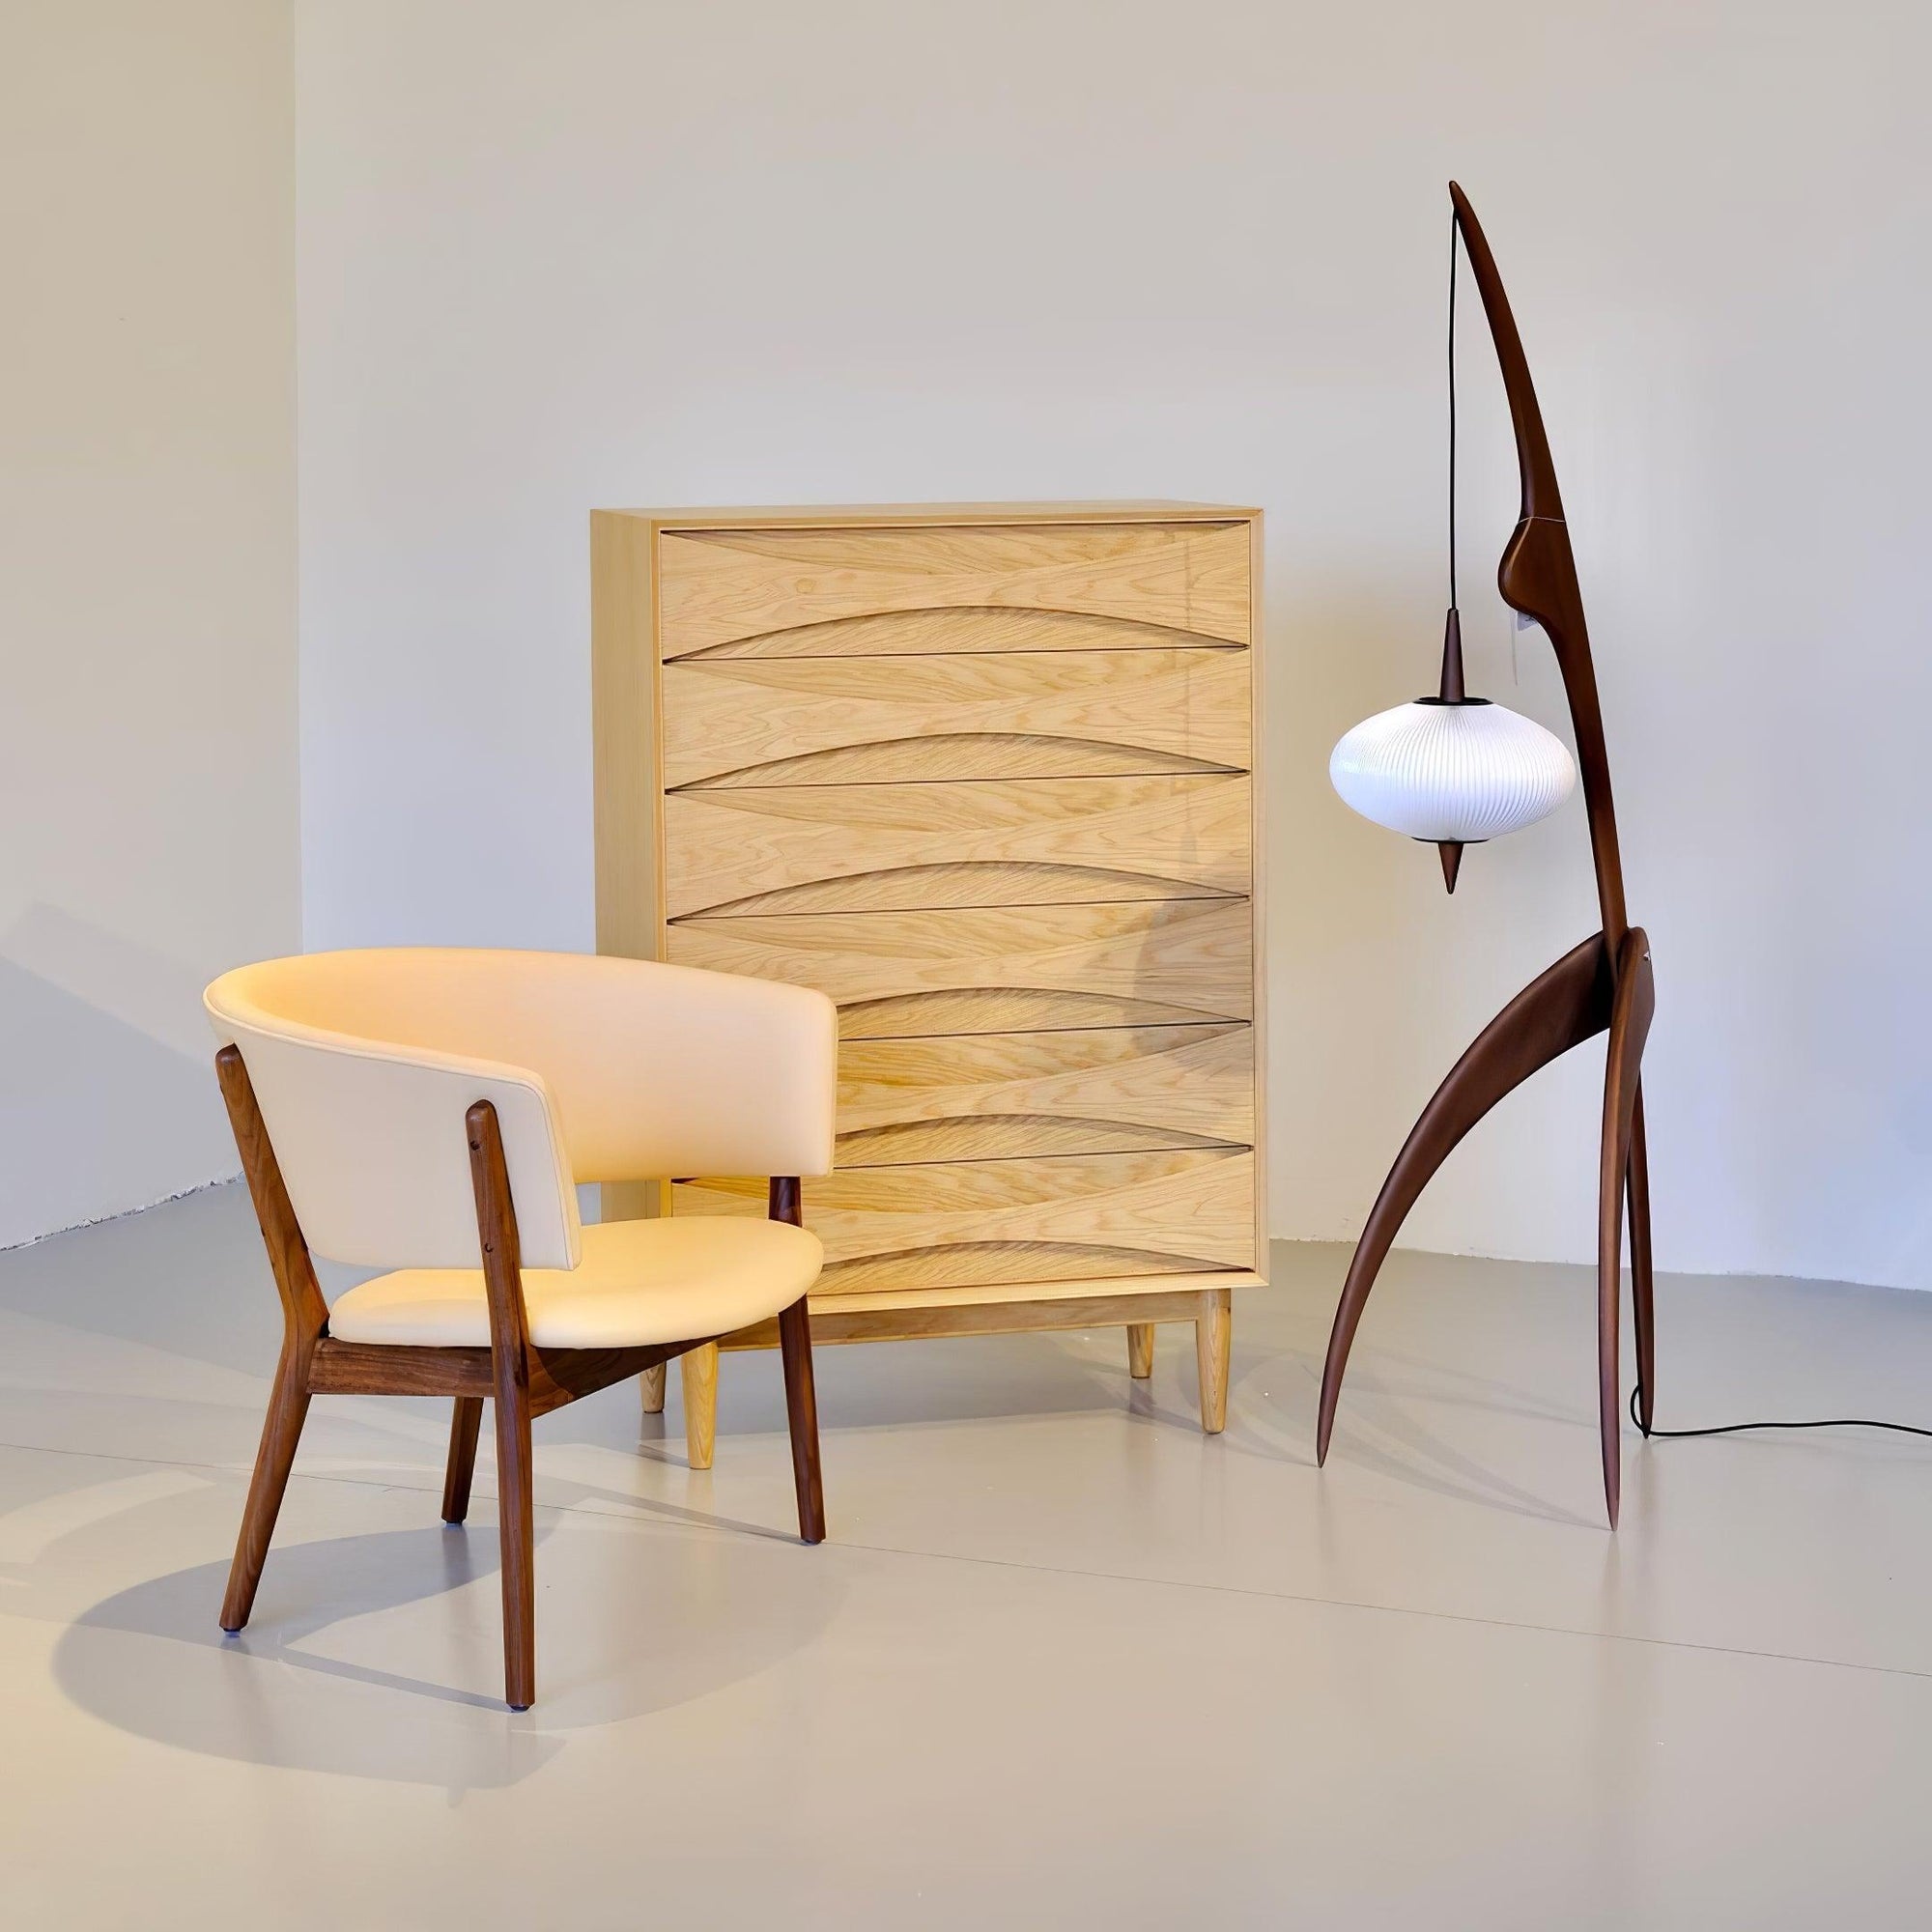 Discover the Magic of Docos' Wood Lamps Modern Features in Wood Designs